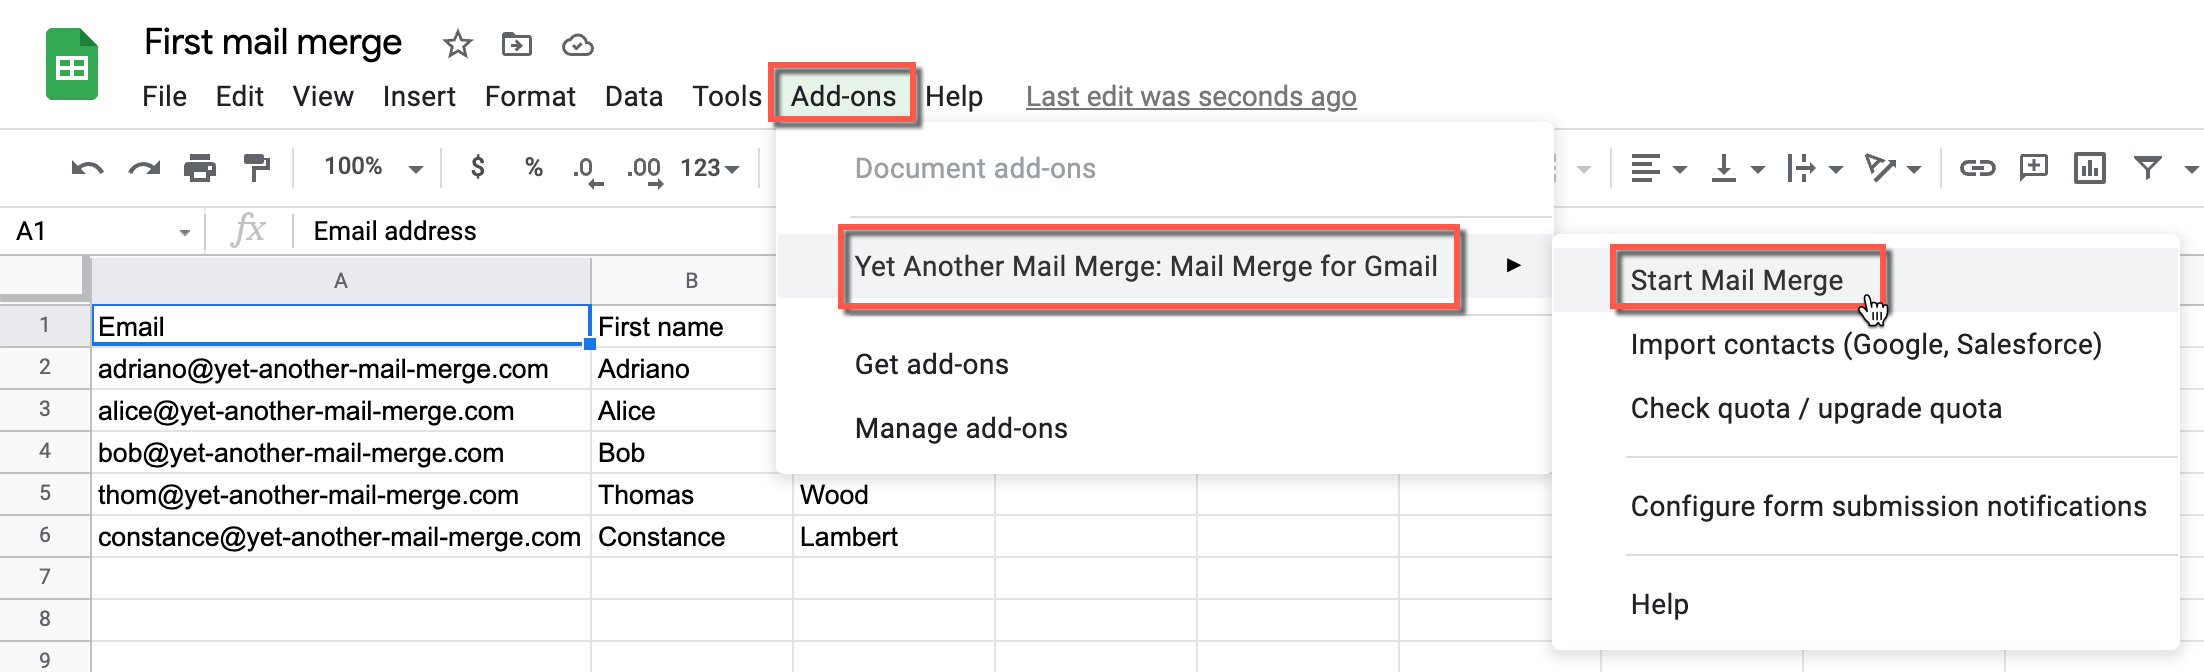 google-sheets-select-add-ons-start-mail-merge-v03.png